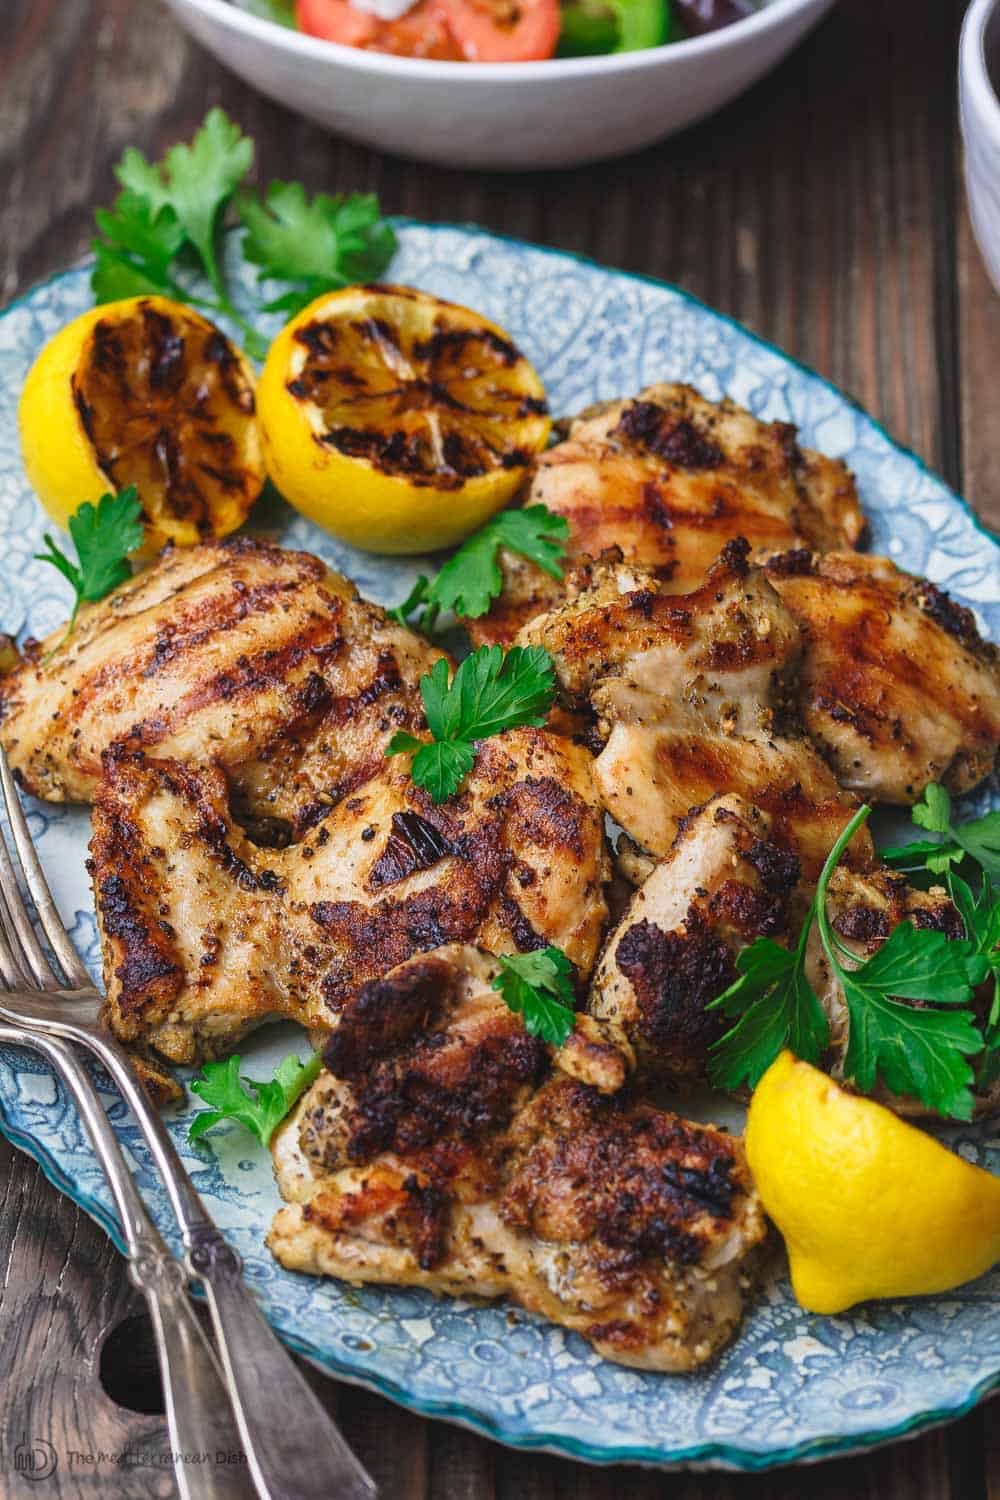 Easy Mediterranean Lemon Chicken Recipe | The Mediterranean Dish. Boneless chicken takes on a great Mediterranean spice mixture and a citrus-garlic marinade. Quickly cooked in a skillet, this lemon chicken makes the perfect weeknight dinner. Recipe from themediterraneandish.com